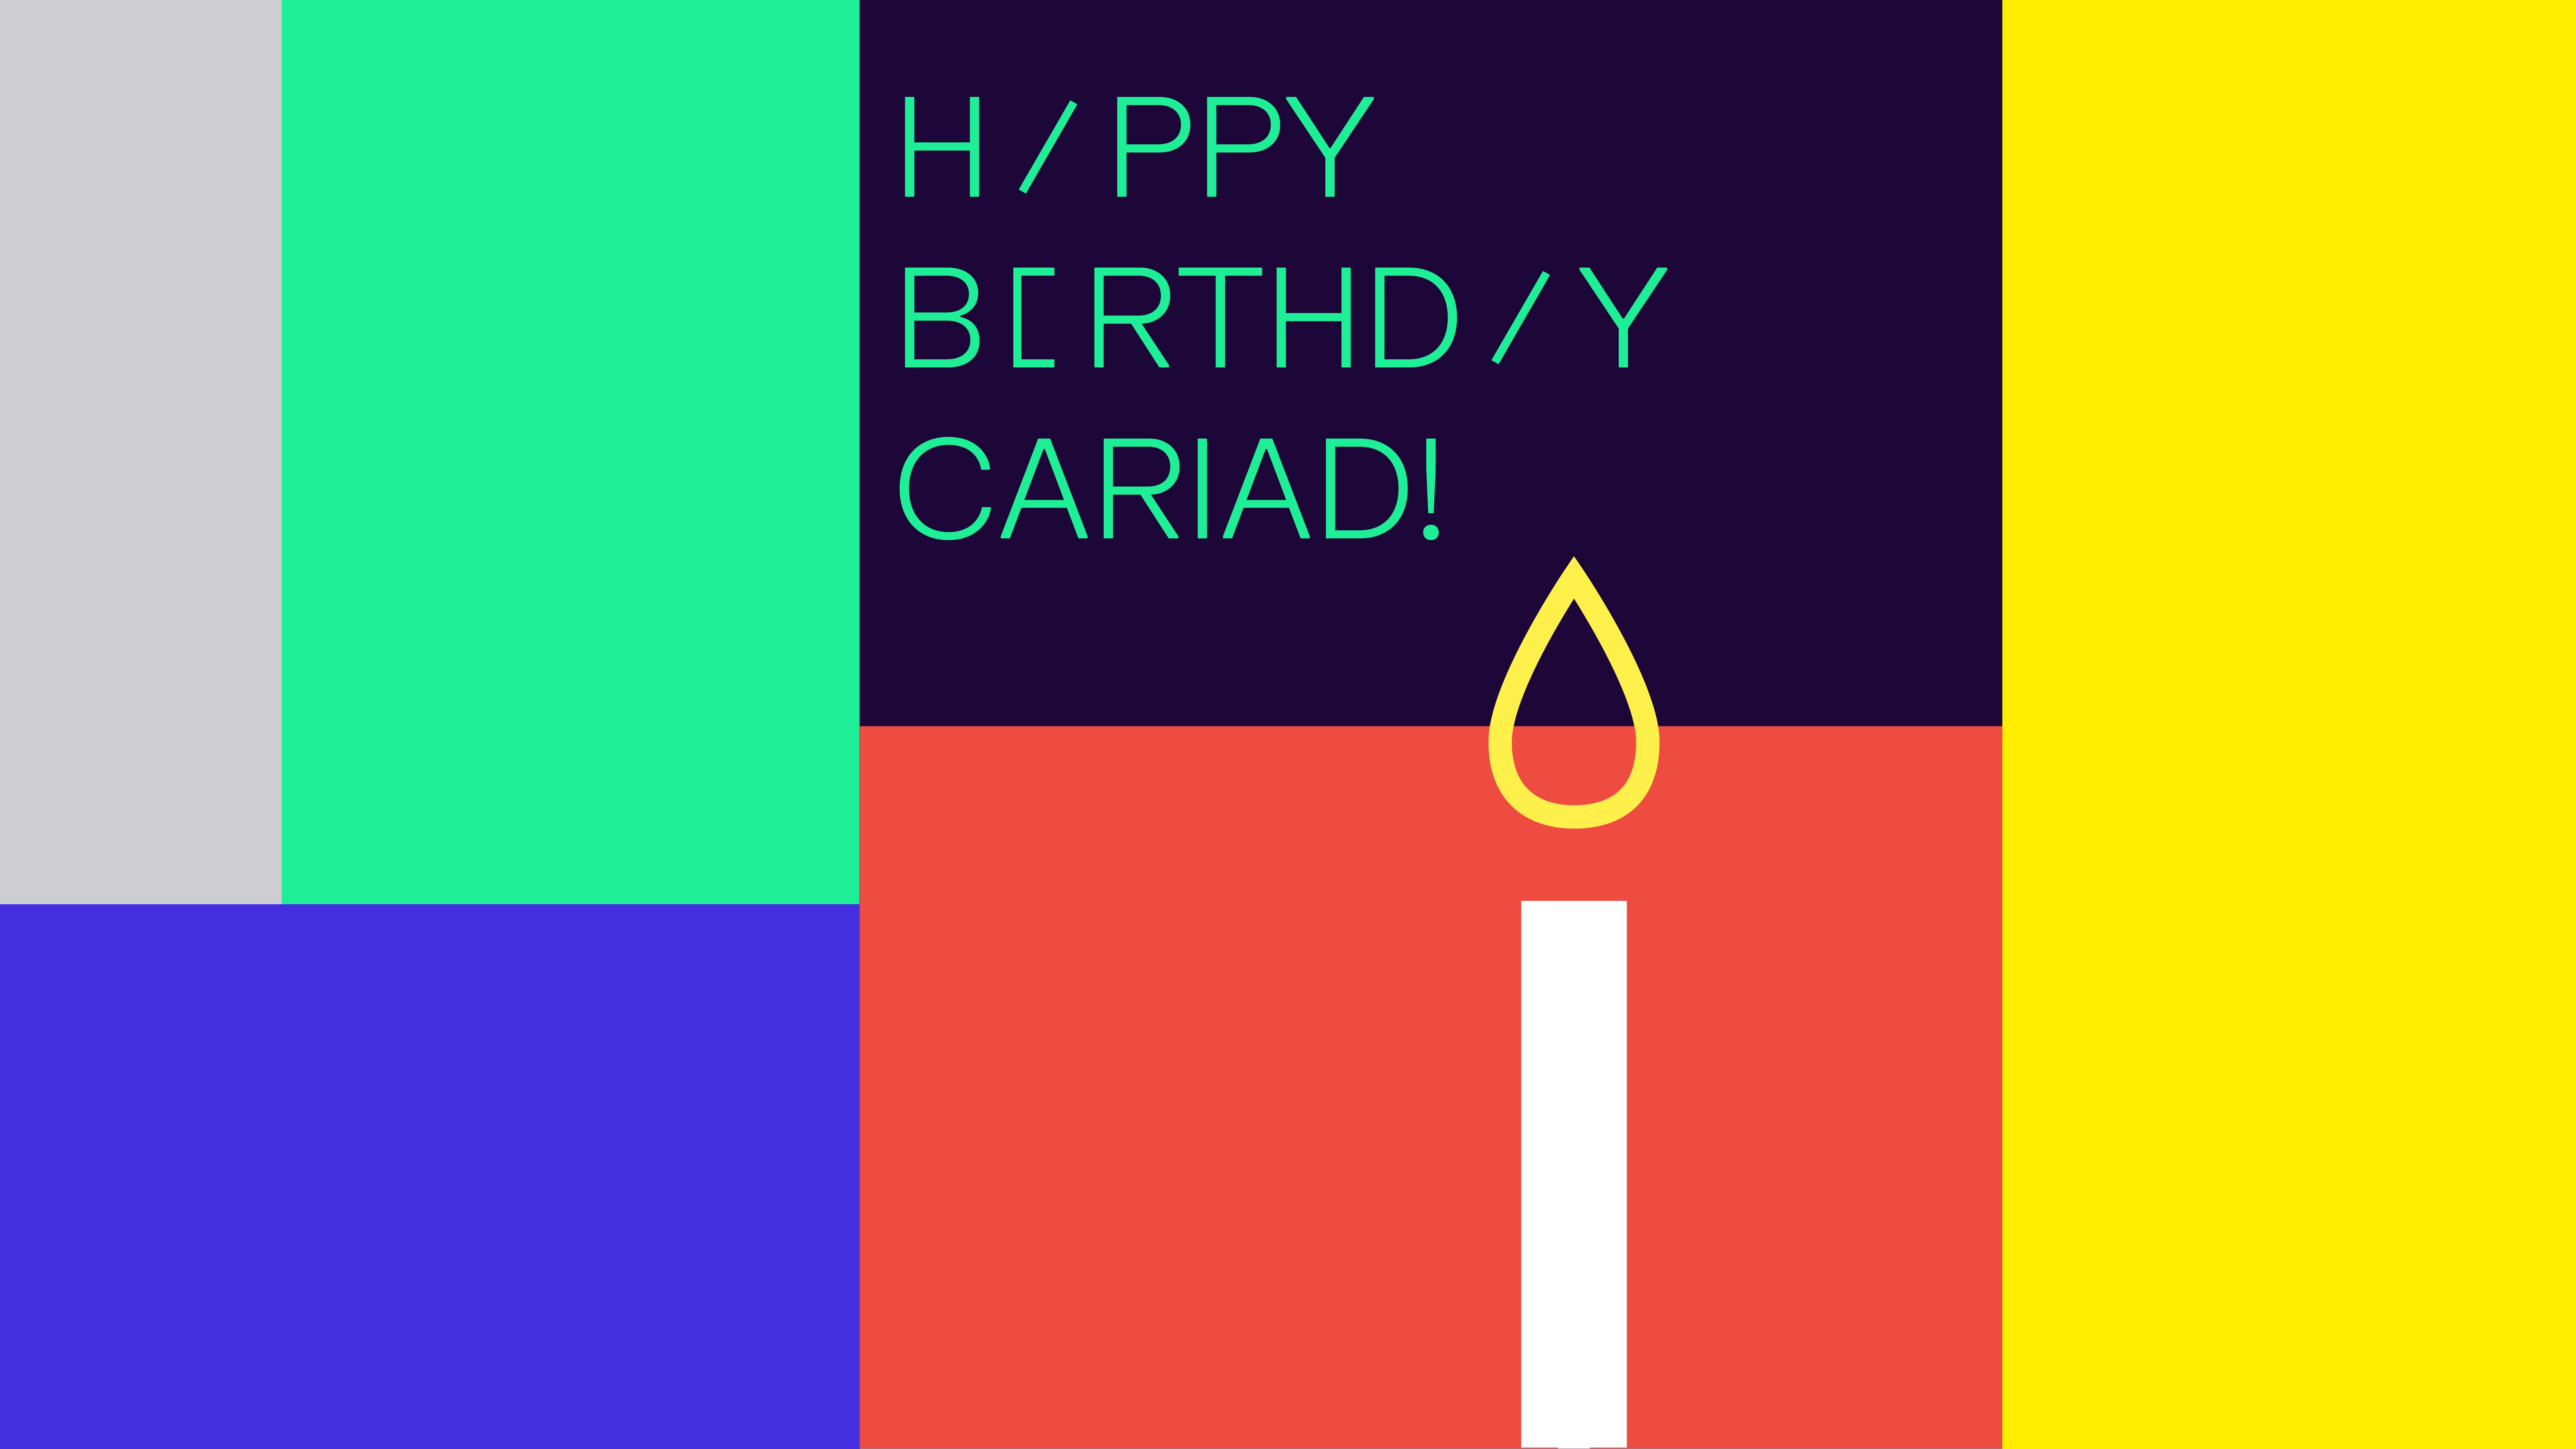 It’s our birthday! CARIAD turns one year old